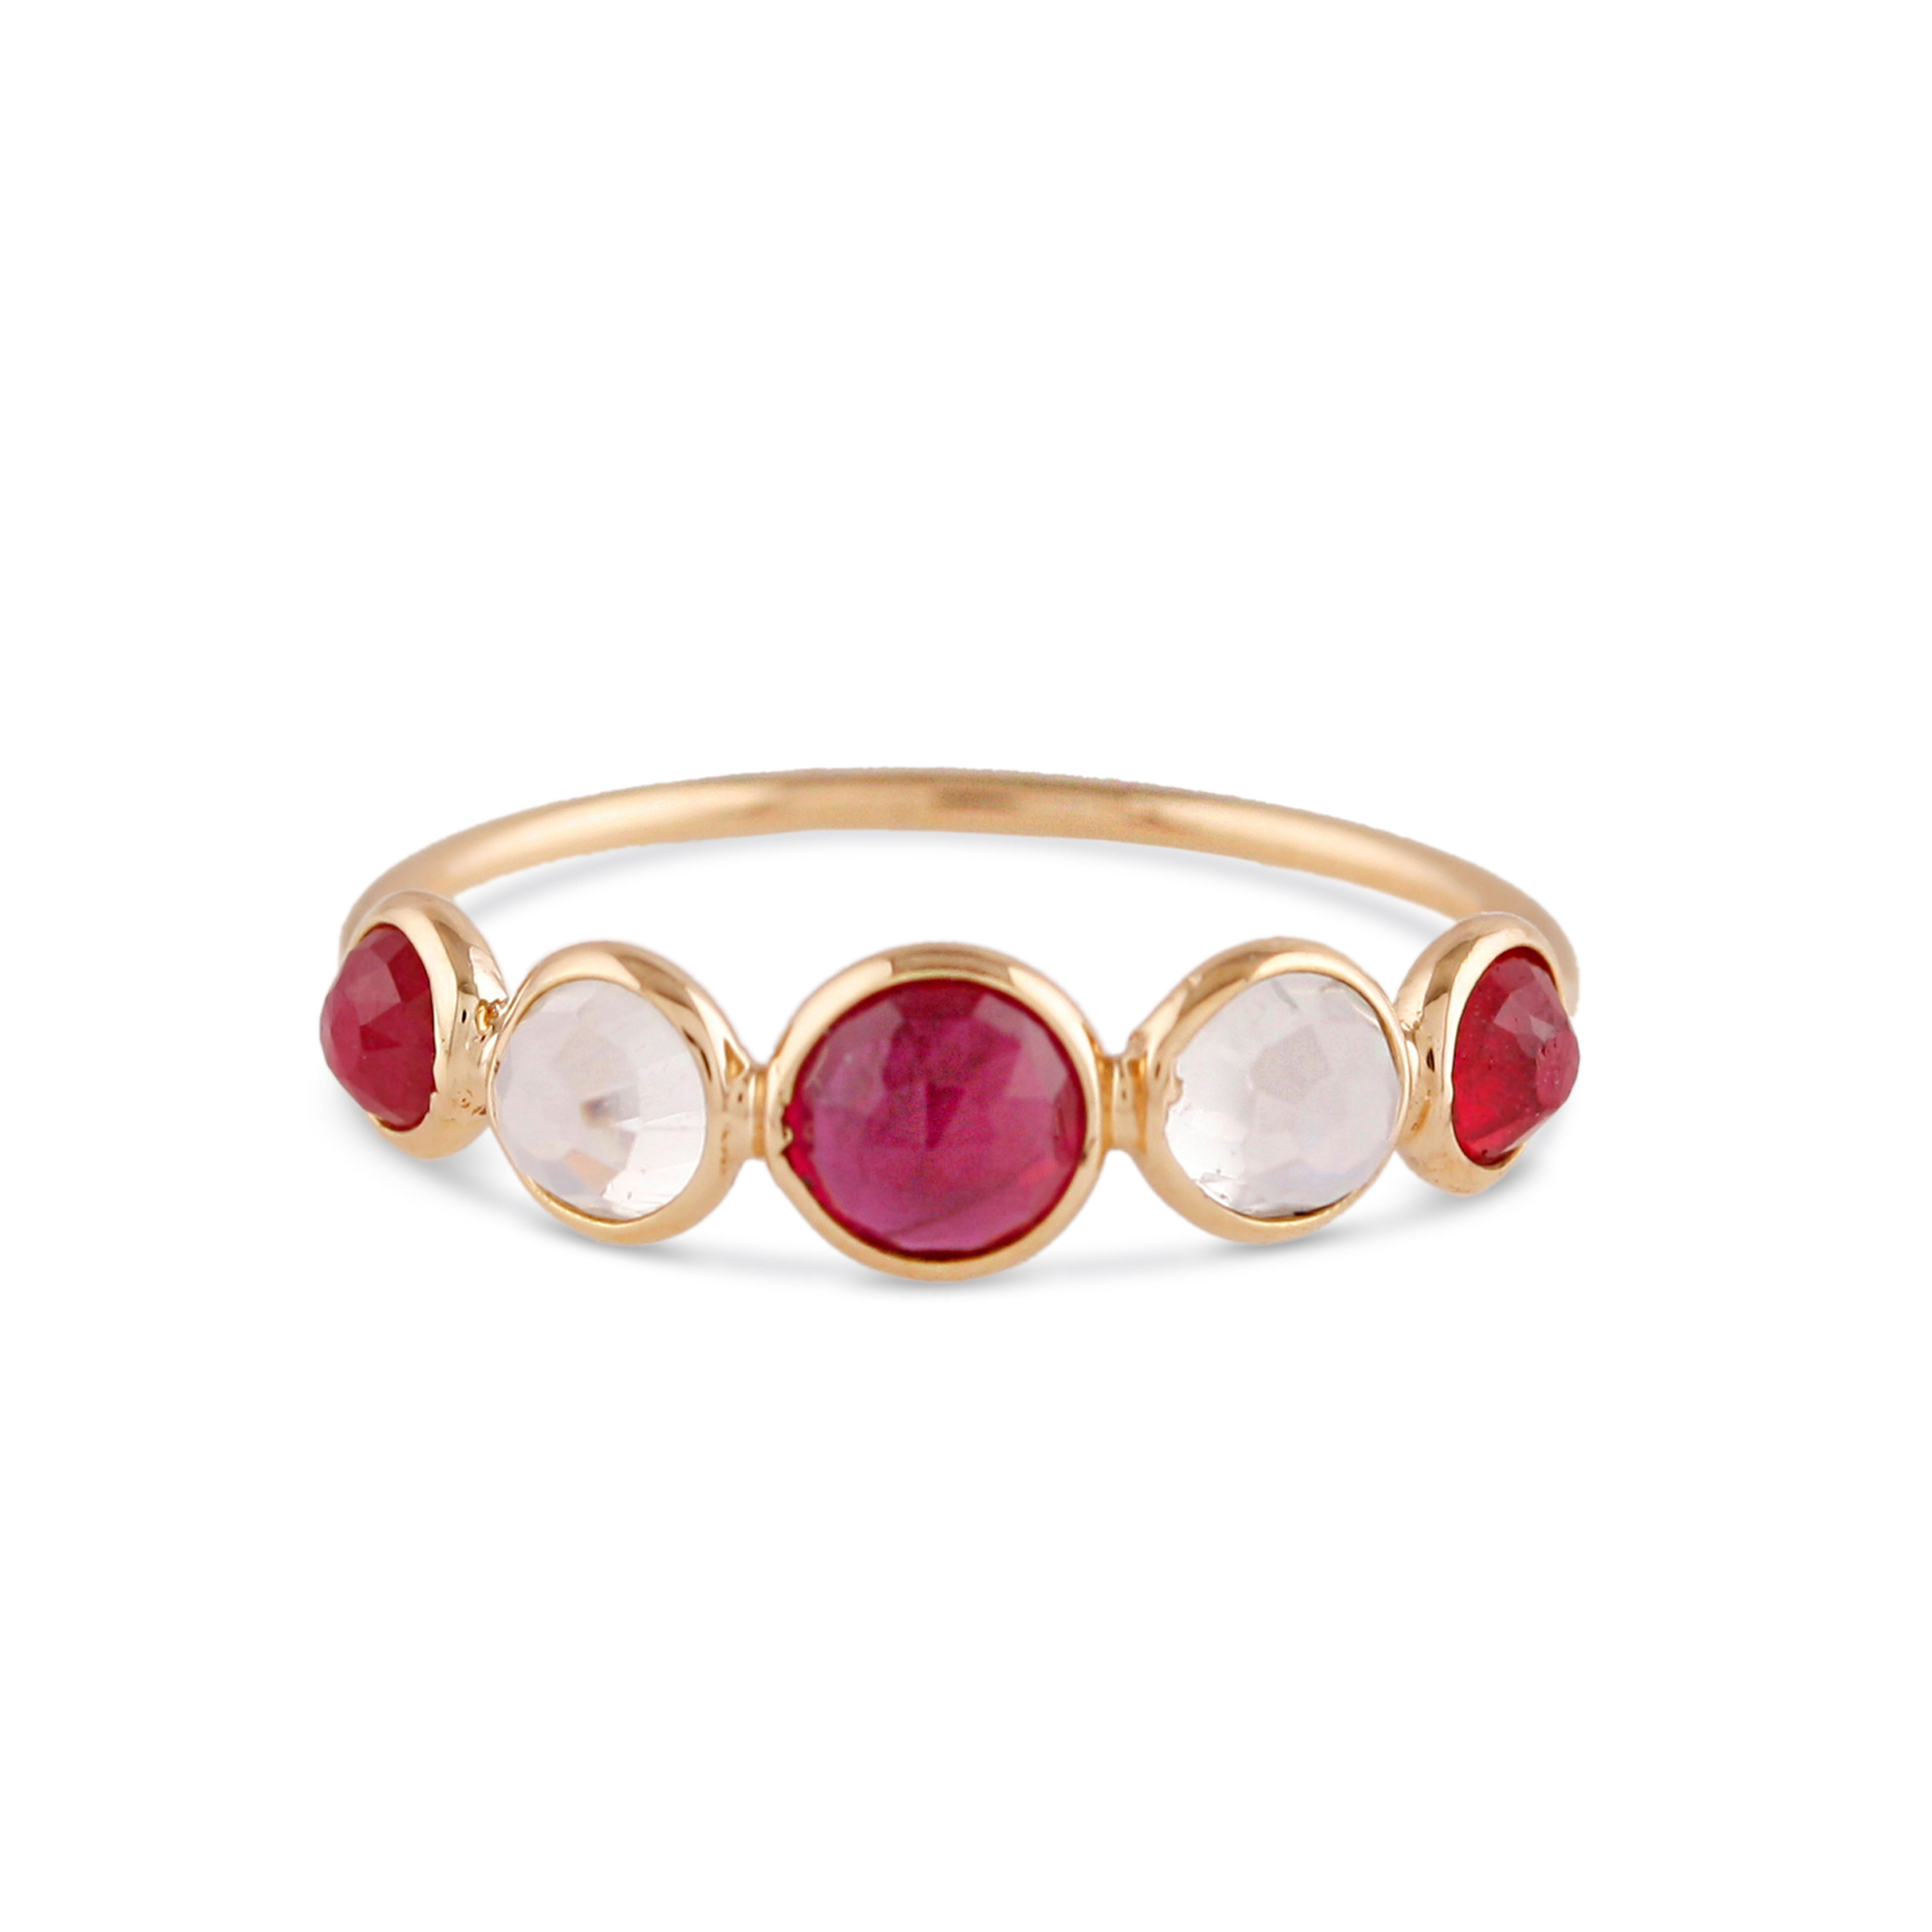 Tresor Beautiful Ring feature 2.84 carats of Gemstone. The Ring are an ode to the luxurious yet classic beauty with sparkly gemstones and feminine hues. Their contemporary and modern design make them perfect and versatile to be worn at any occasion. 